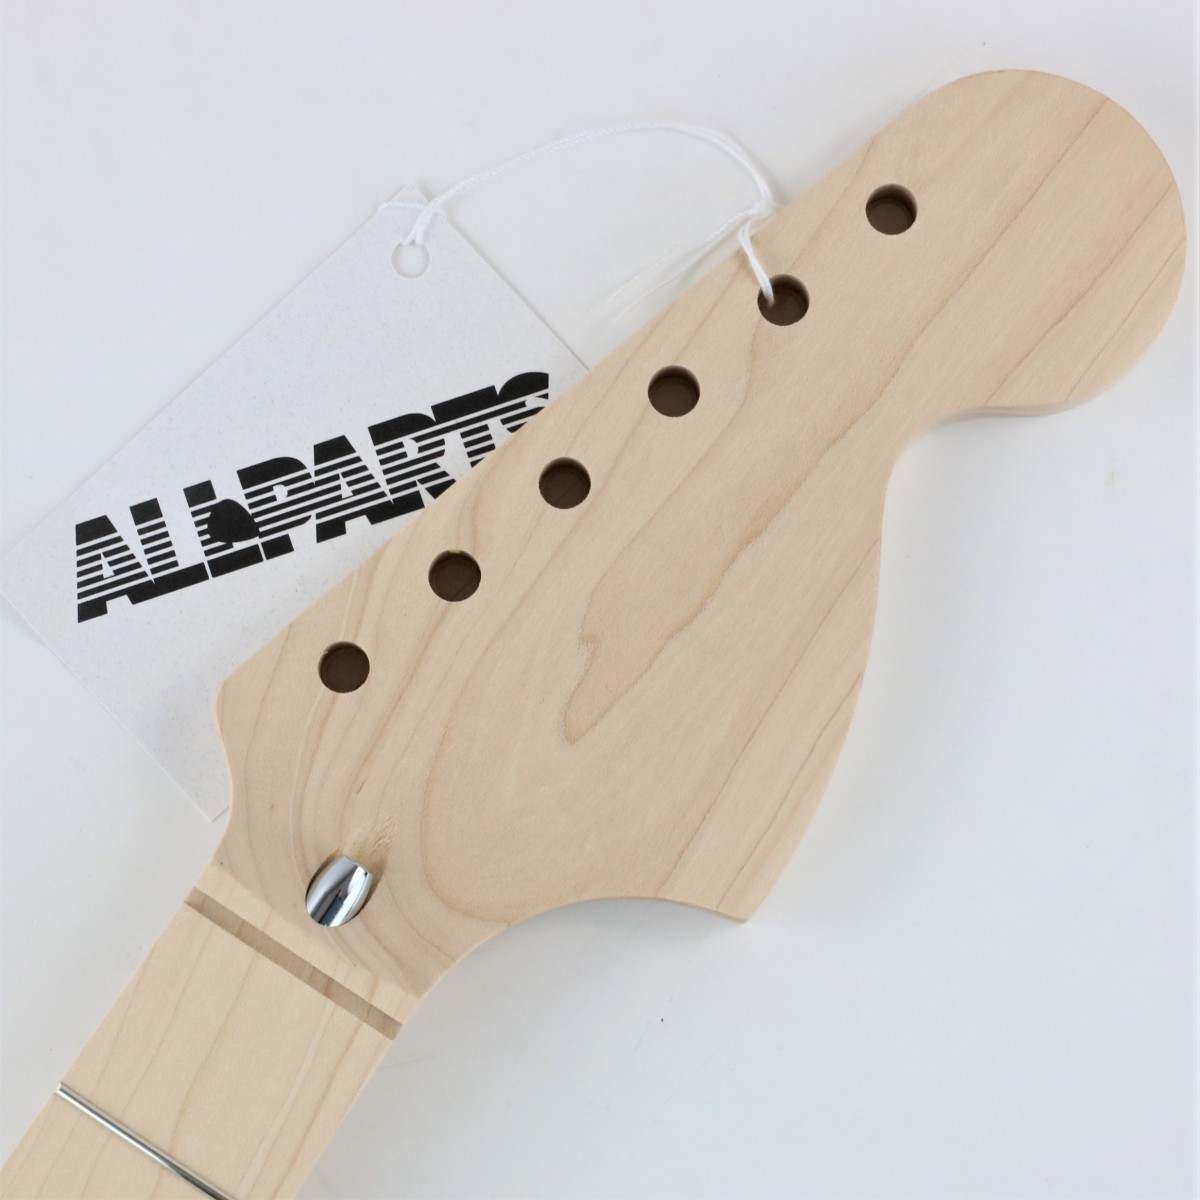 All Parts Maple Relic Neck 21F 【☆超目玉】 - ギター